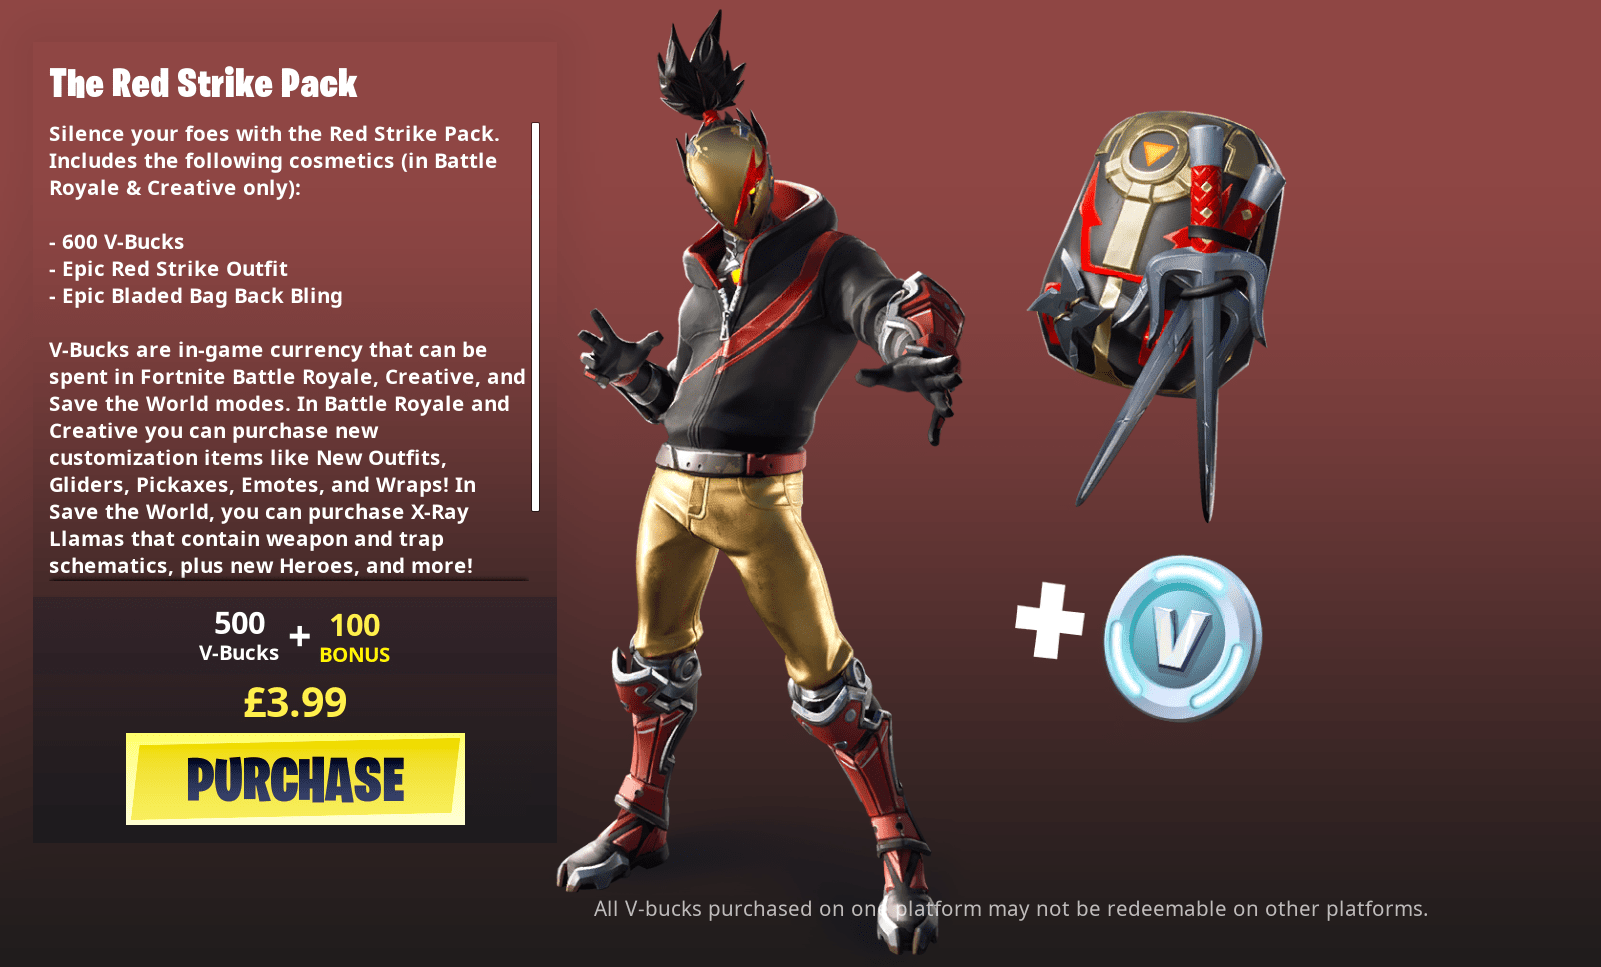 Fortnite Red Strike Pack Available for Purchase